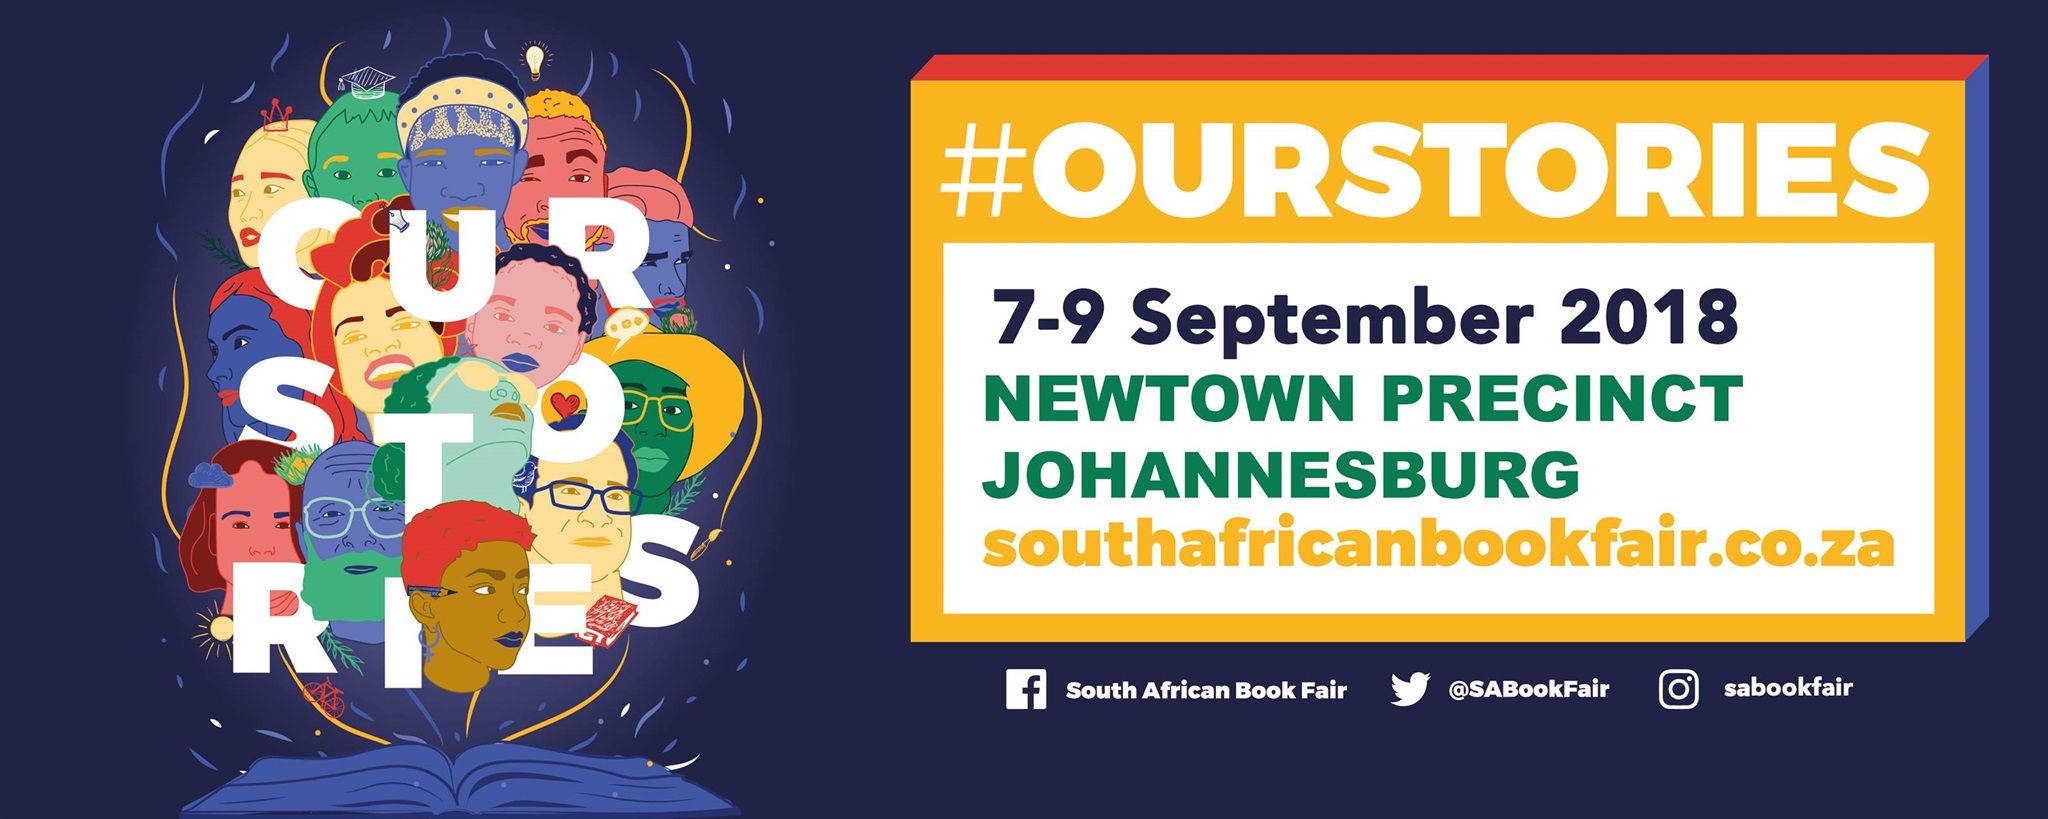 120 Authors In 2018 South African Book Fair Lineup photo